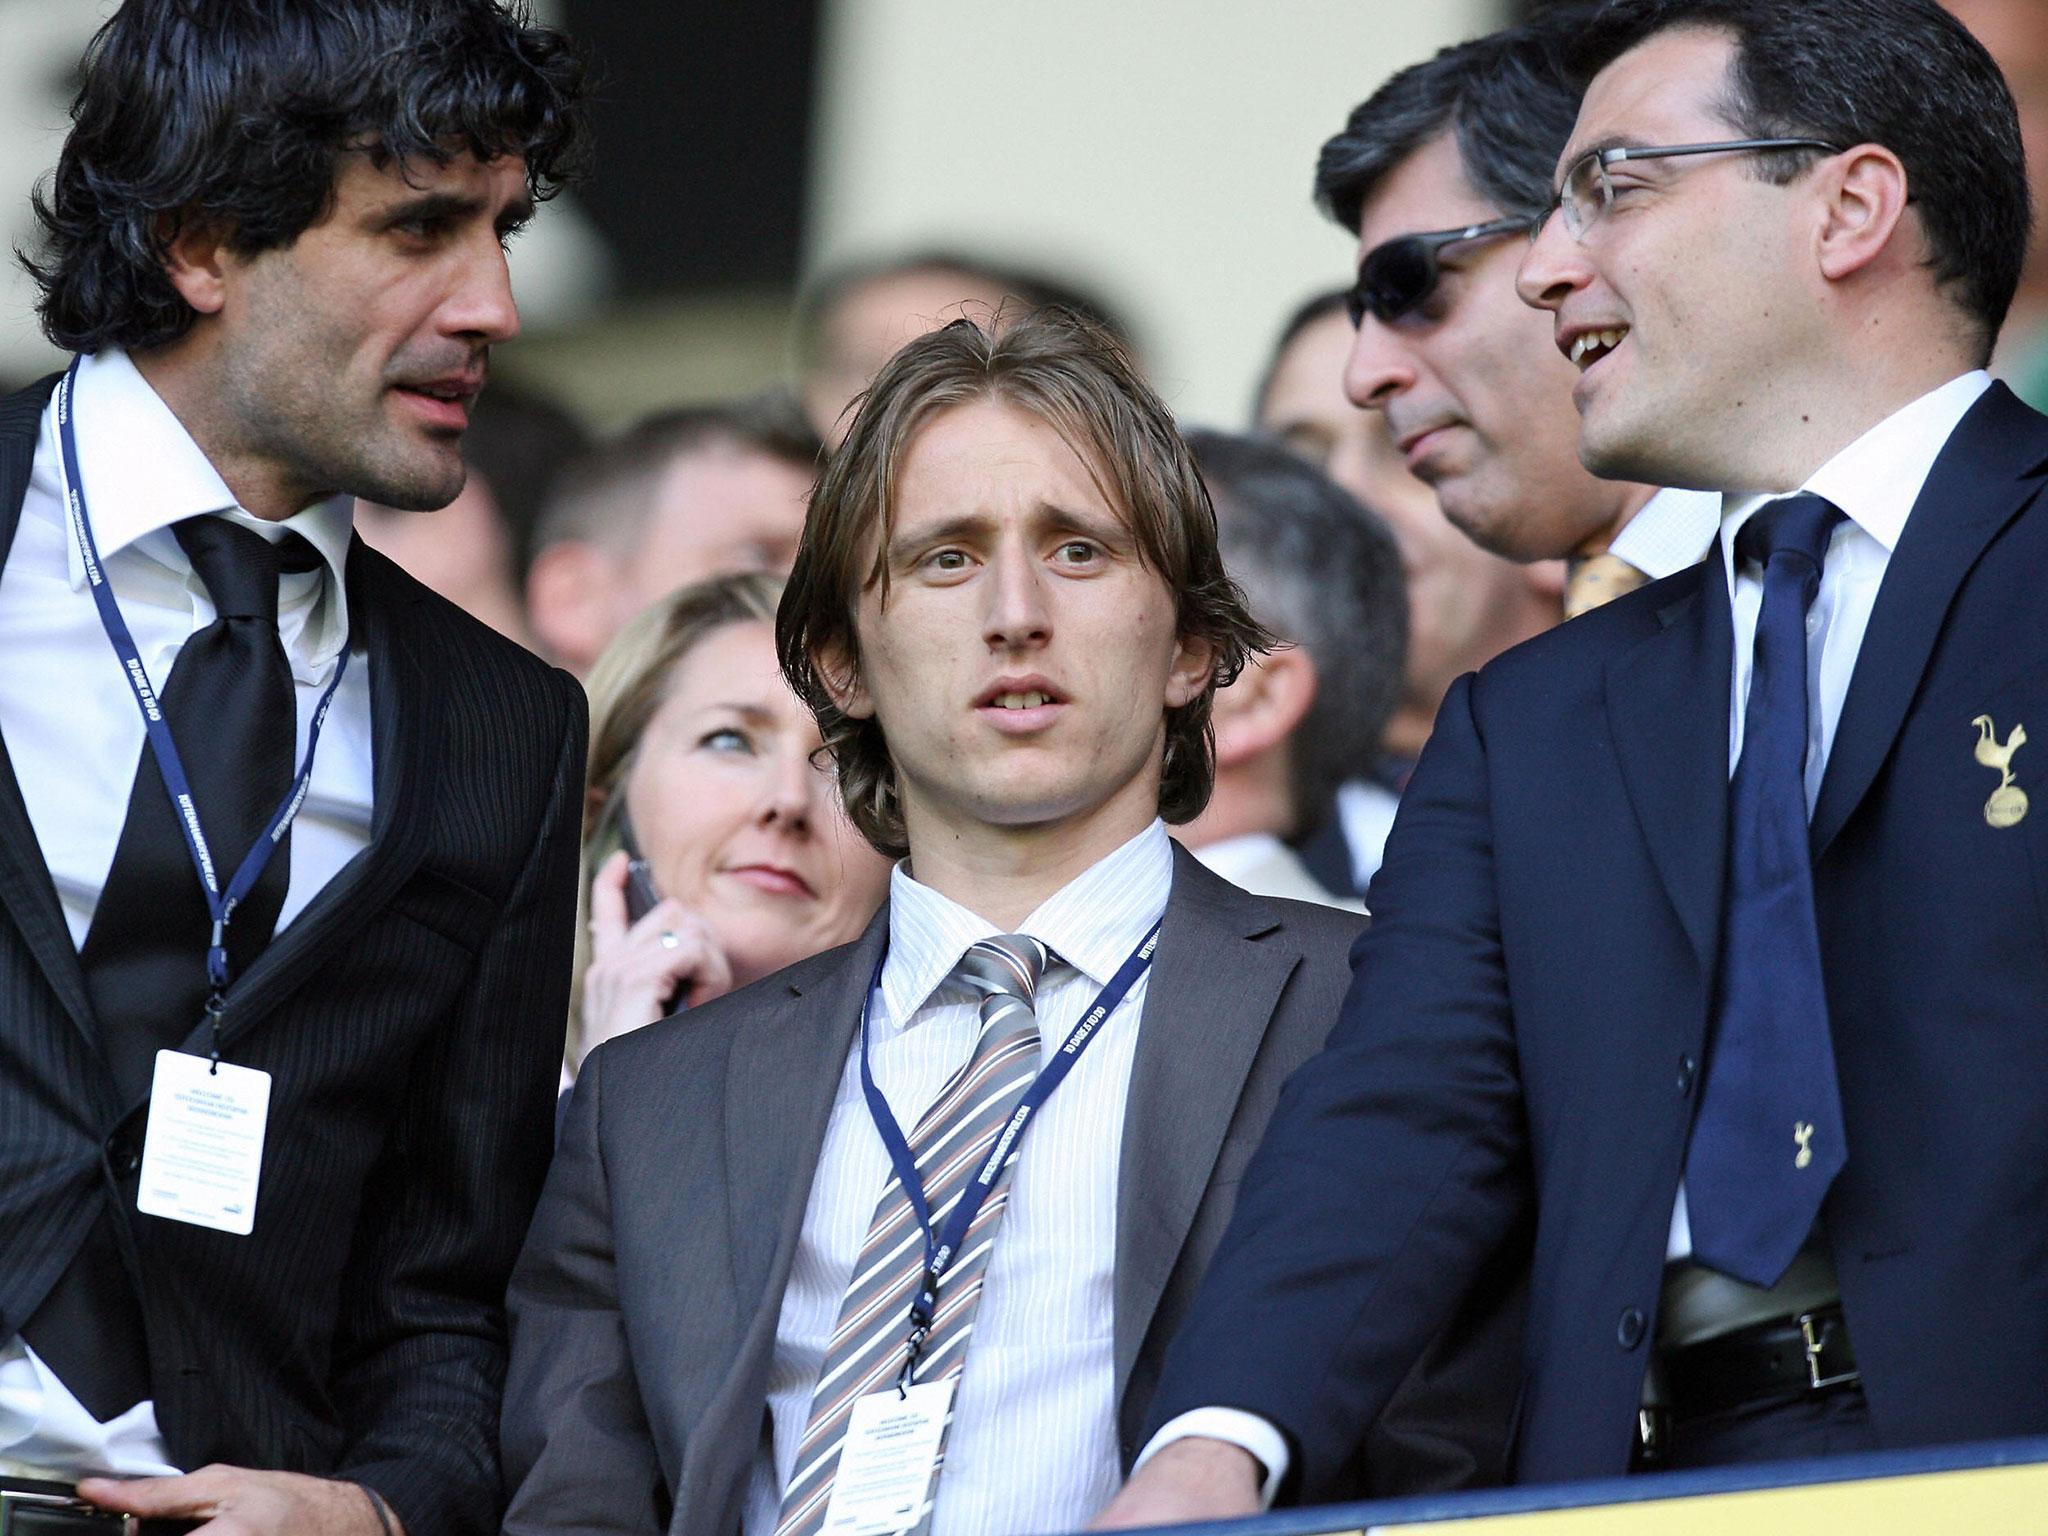 Luka Modric will face Tottenham this week nearly 10 years after leaving them